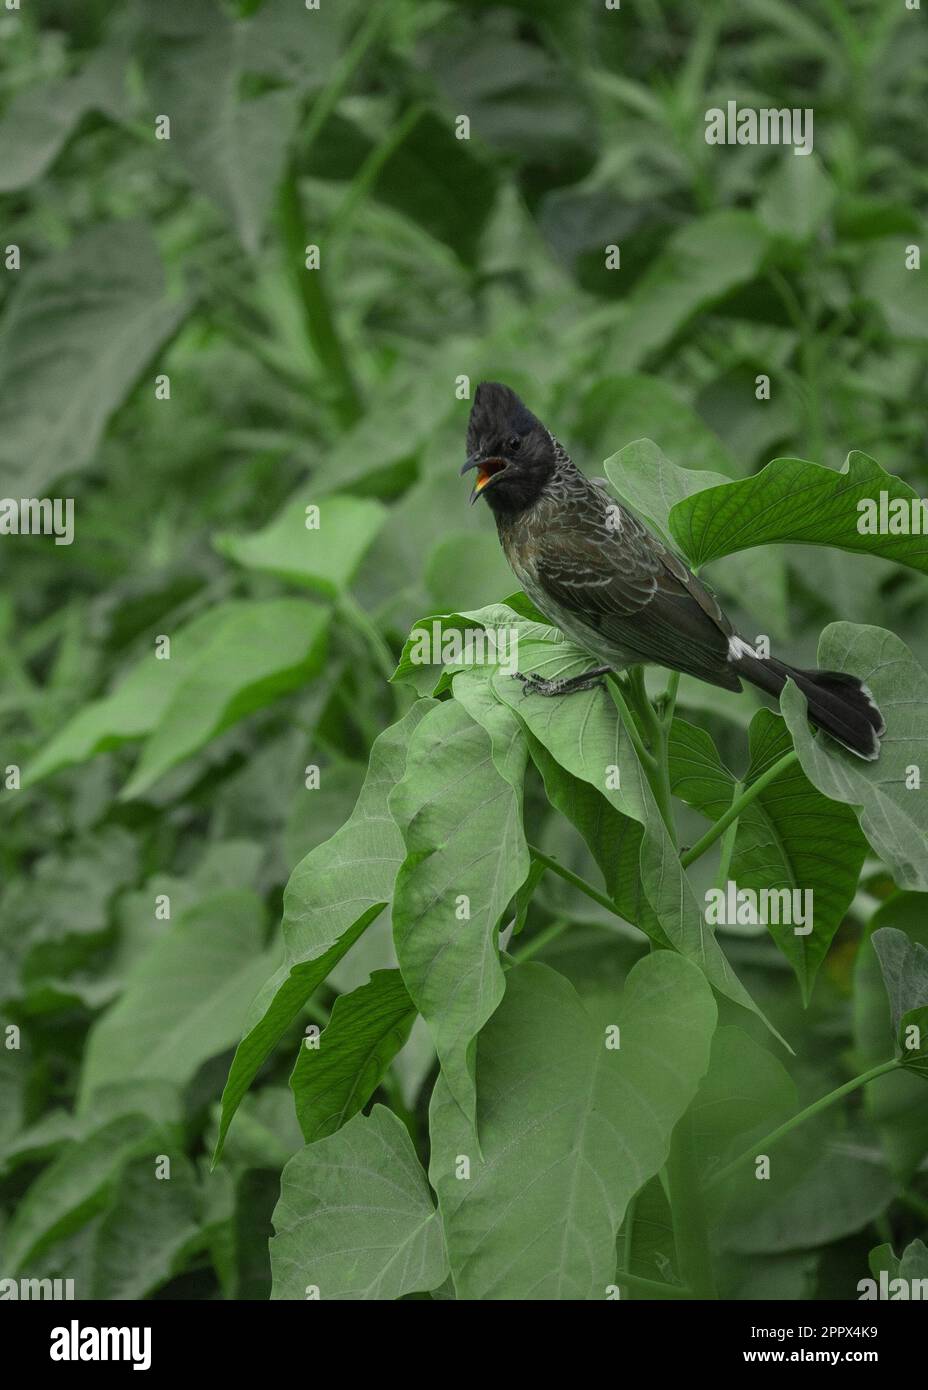 Red vented bulbul common bird of india Stock Photo